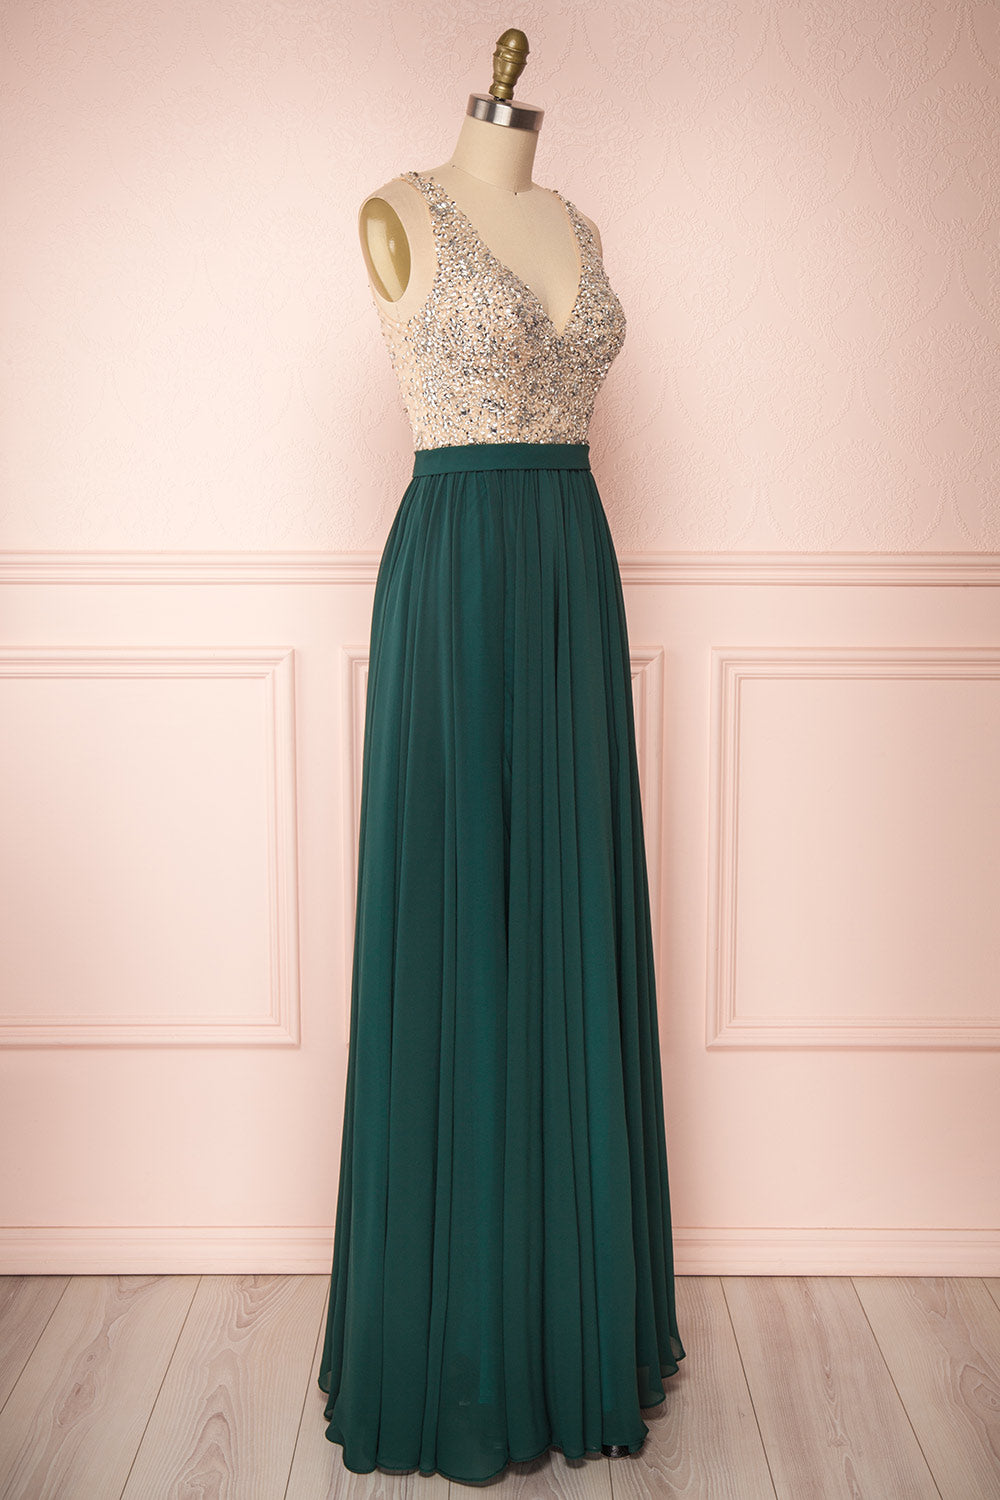 Eridani Émeraude Green A-Line Gown w/ Crystals | Boutique 1861 side view 